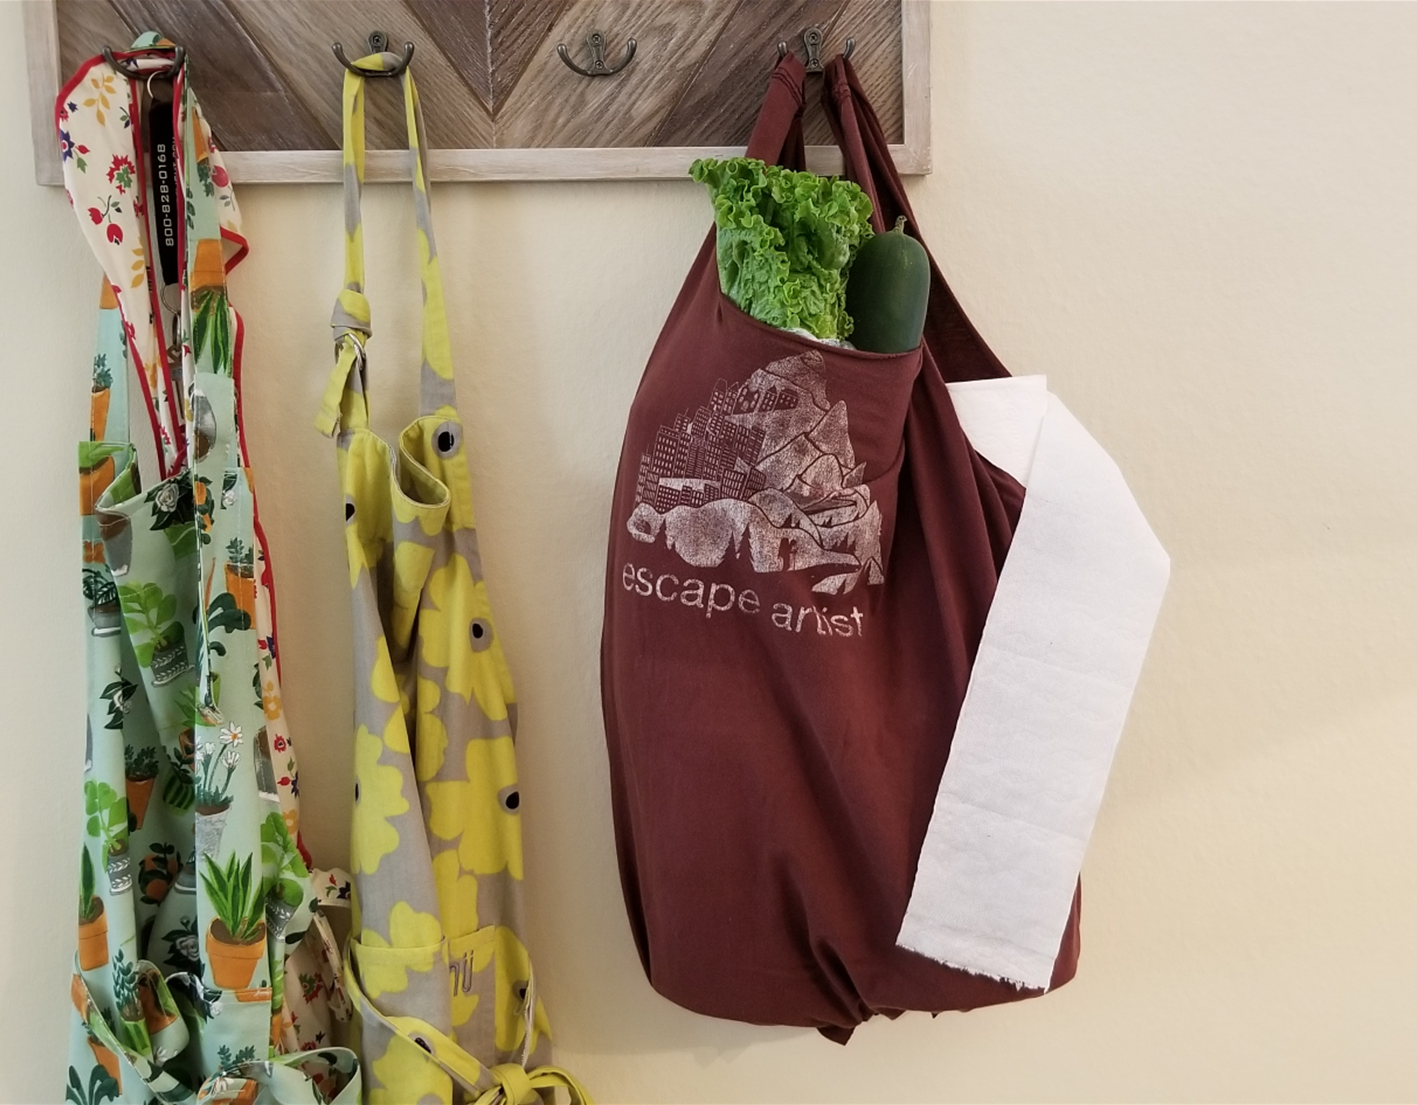 A finished t-shirt tote bag filled with vegetables and TP.